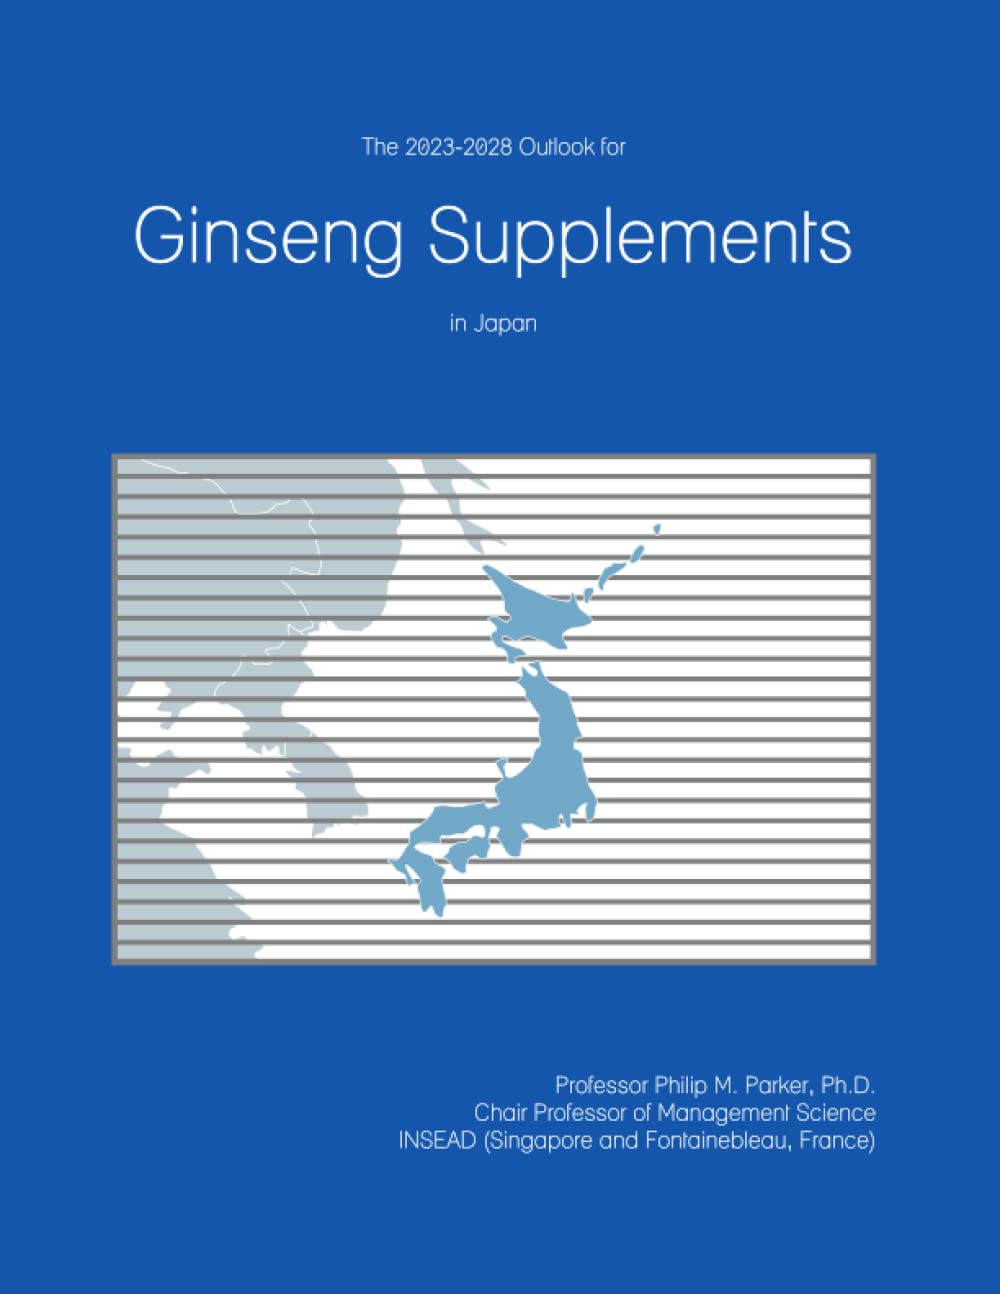 2023-2028 Ginseng Supplement Outlook in...